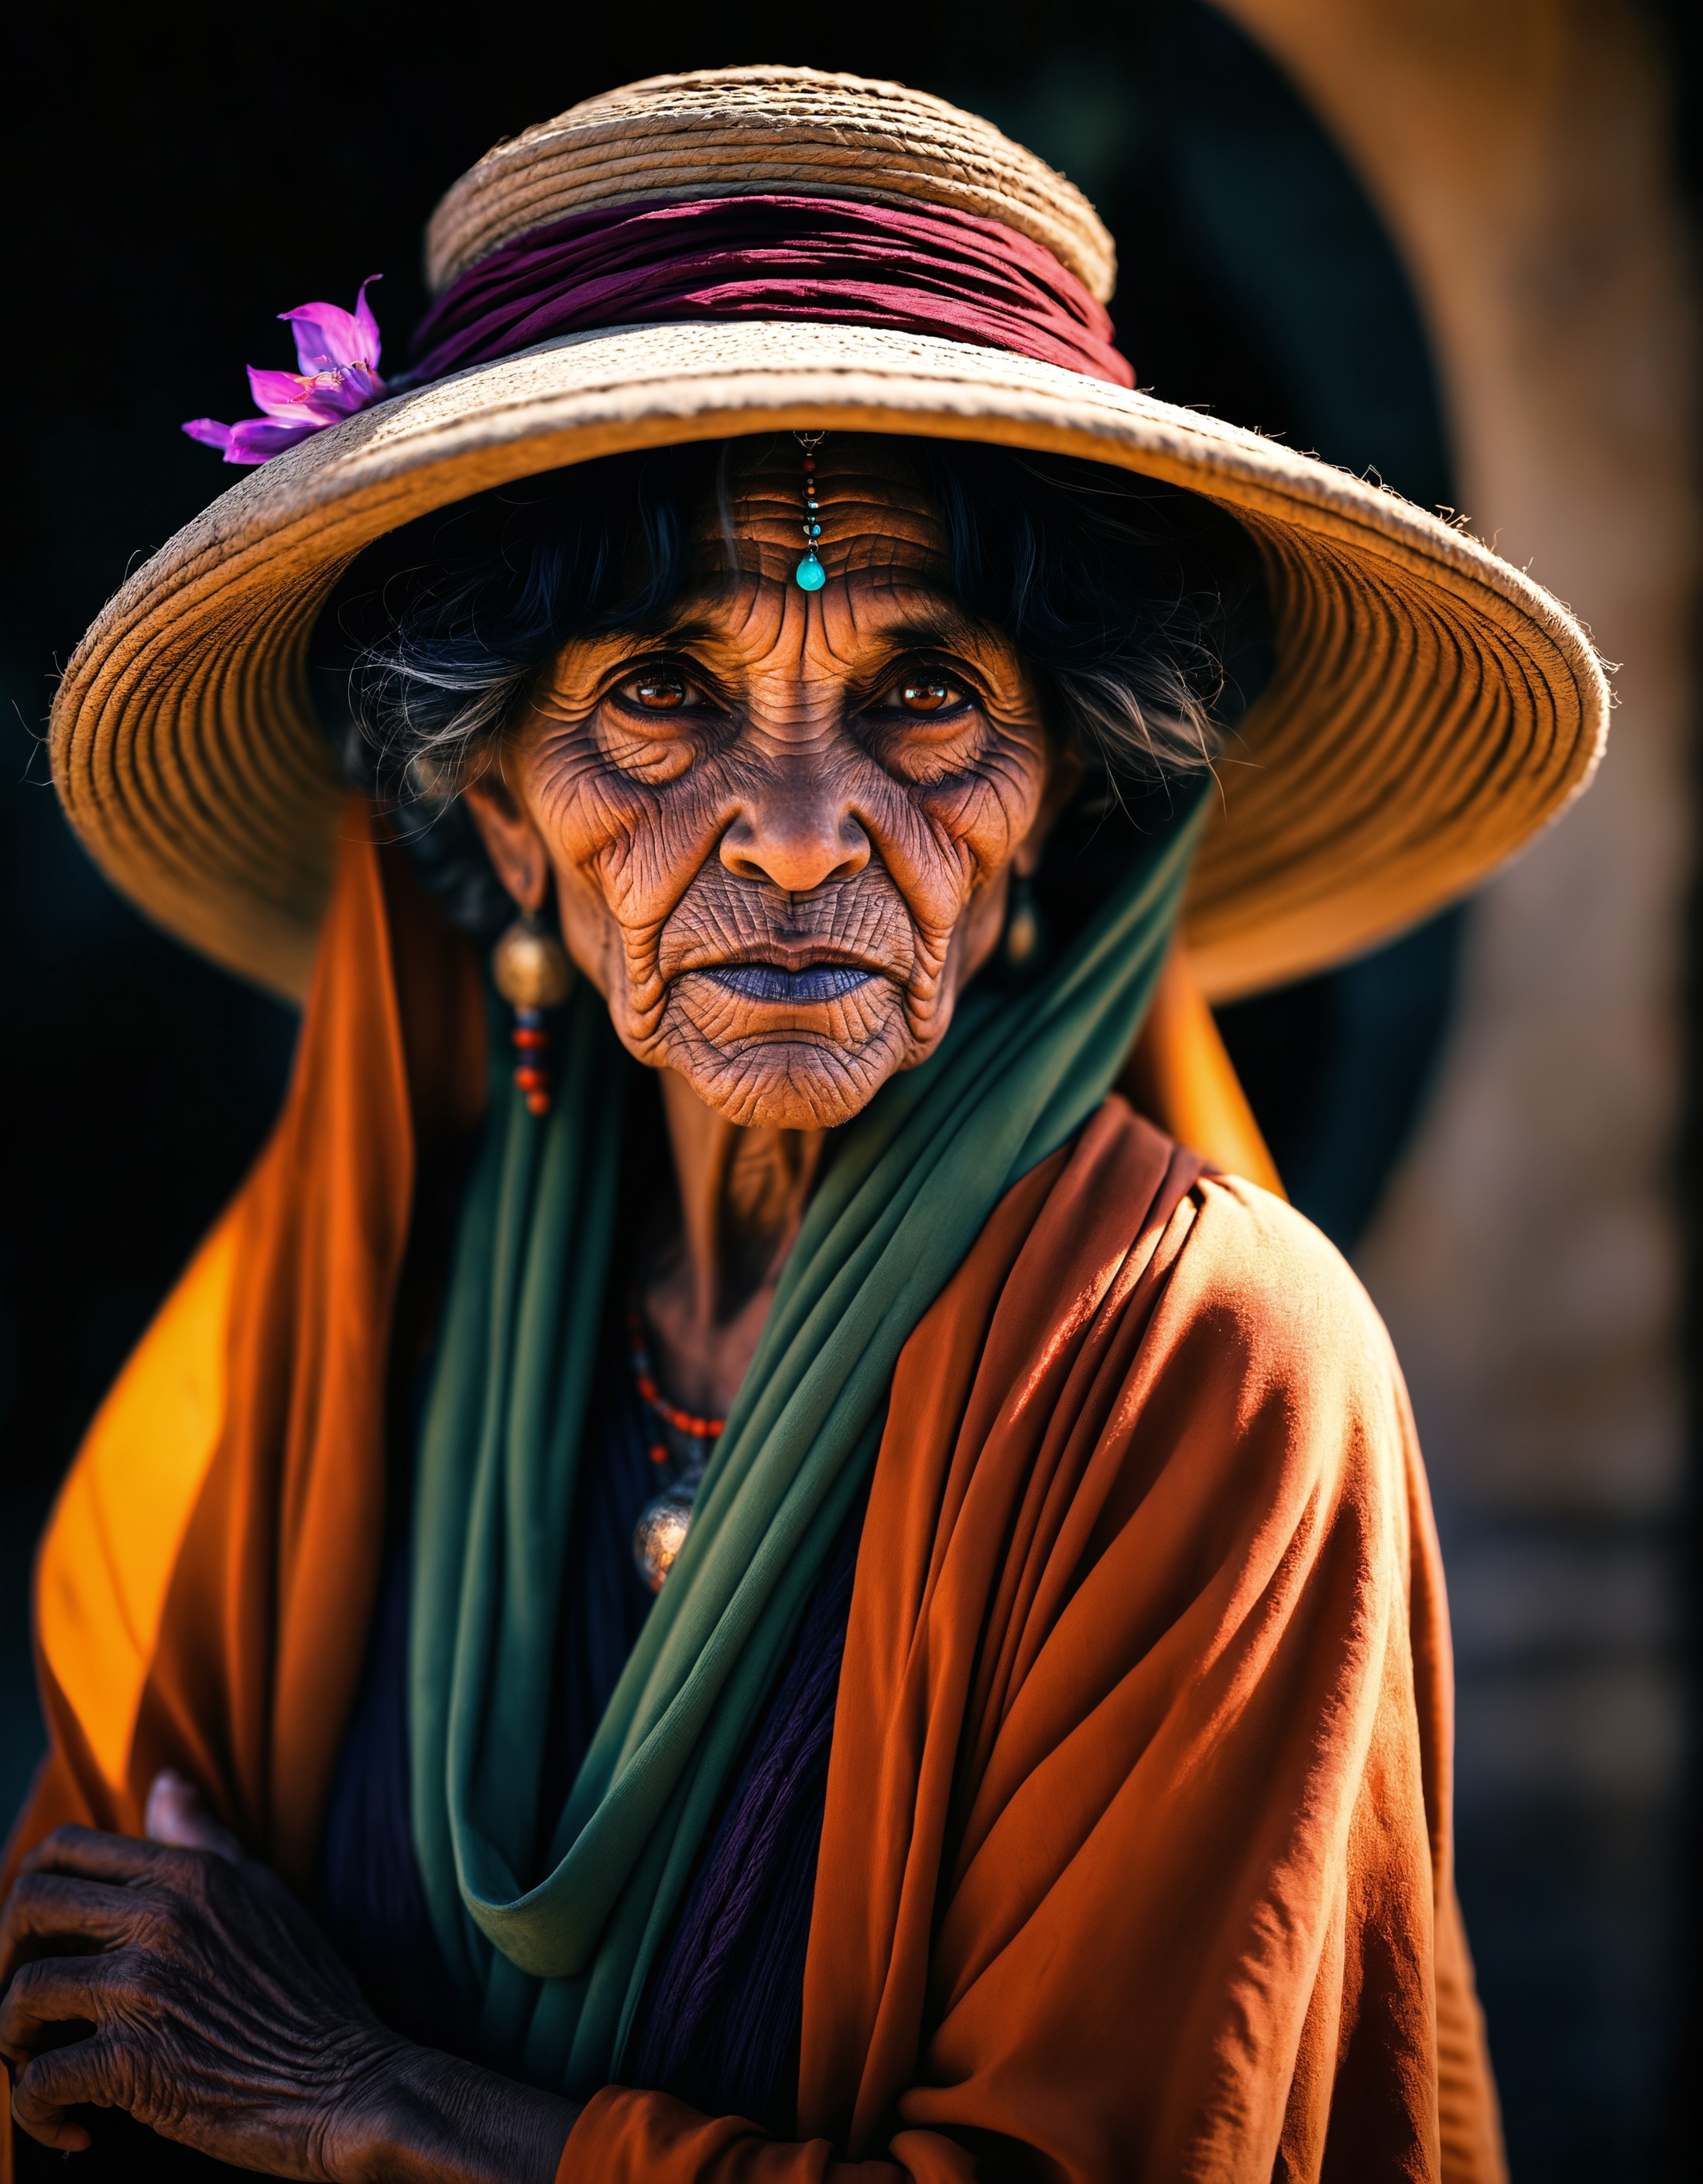 Capture the vibrant dark green-neon essence of a weathered old and worn-out female bedouin sorcerer amidst (swirling magic...